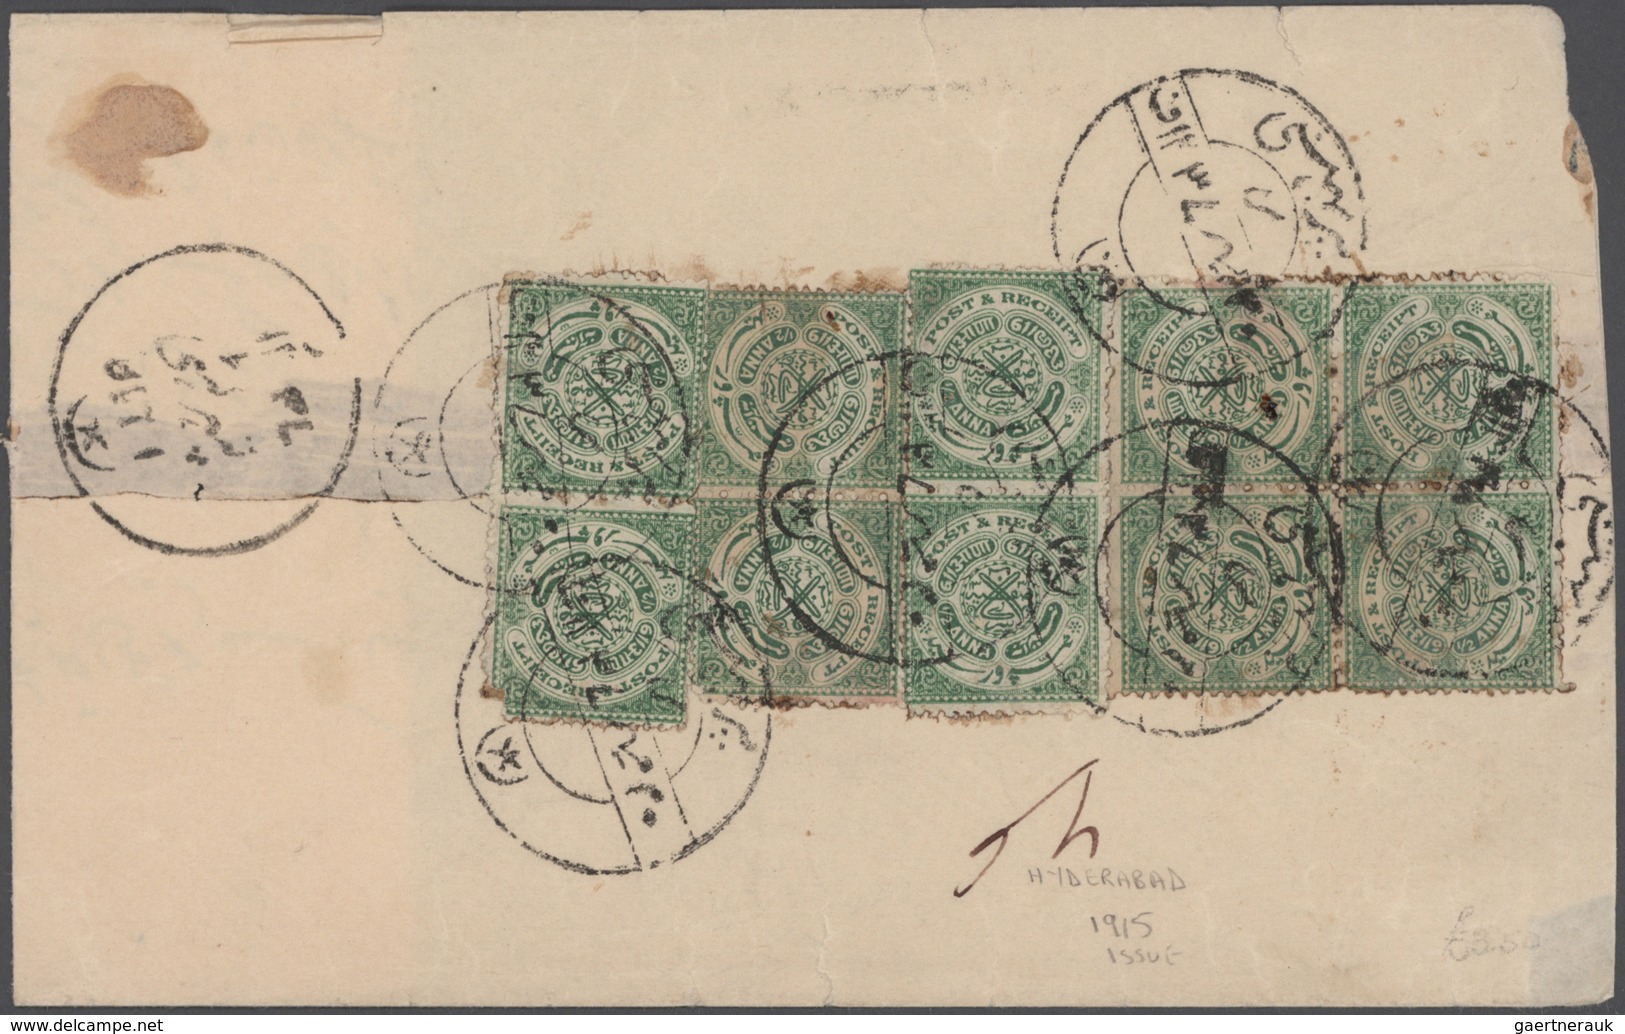 Indien - Feudalstaaten: 1850/1947 (ca.), interesting postal history collection of the Indian Feudato